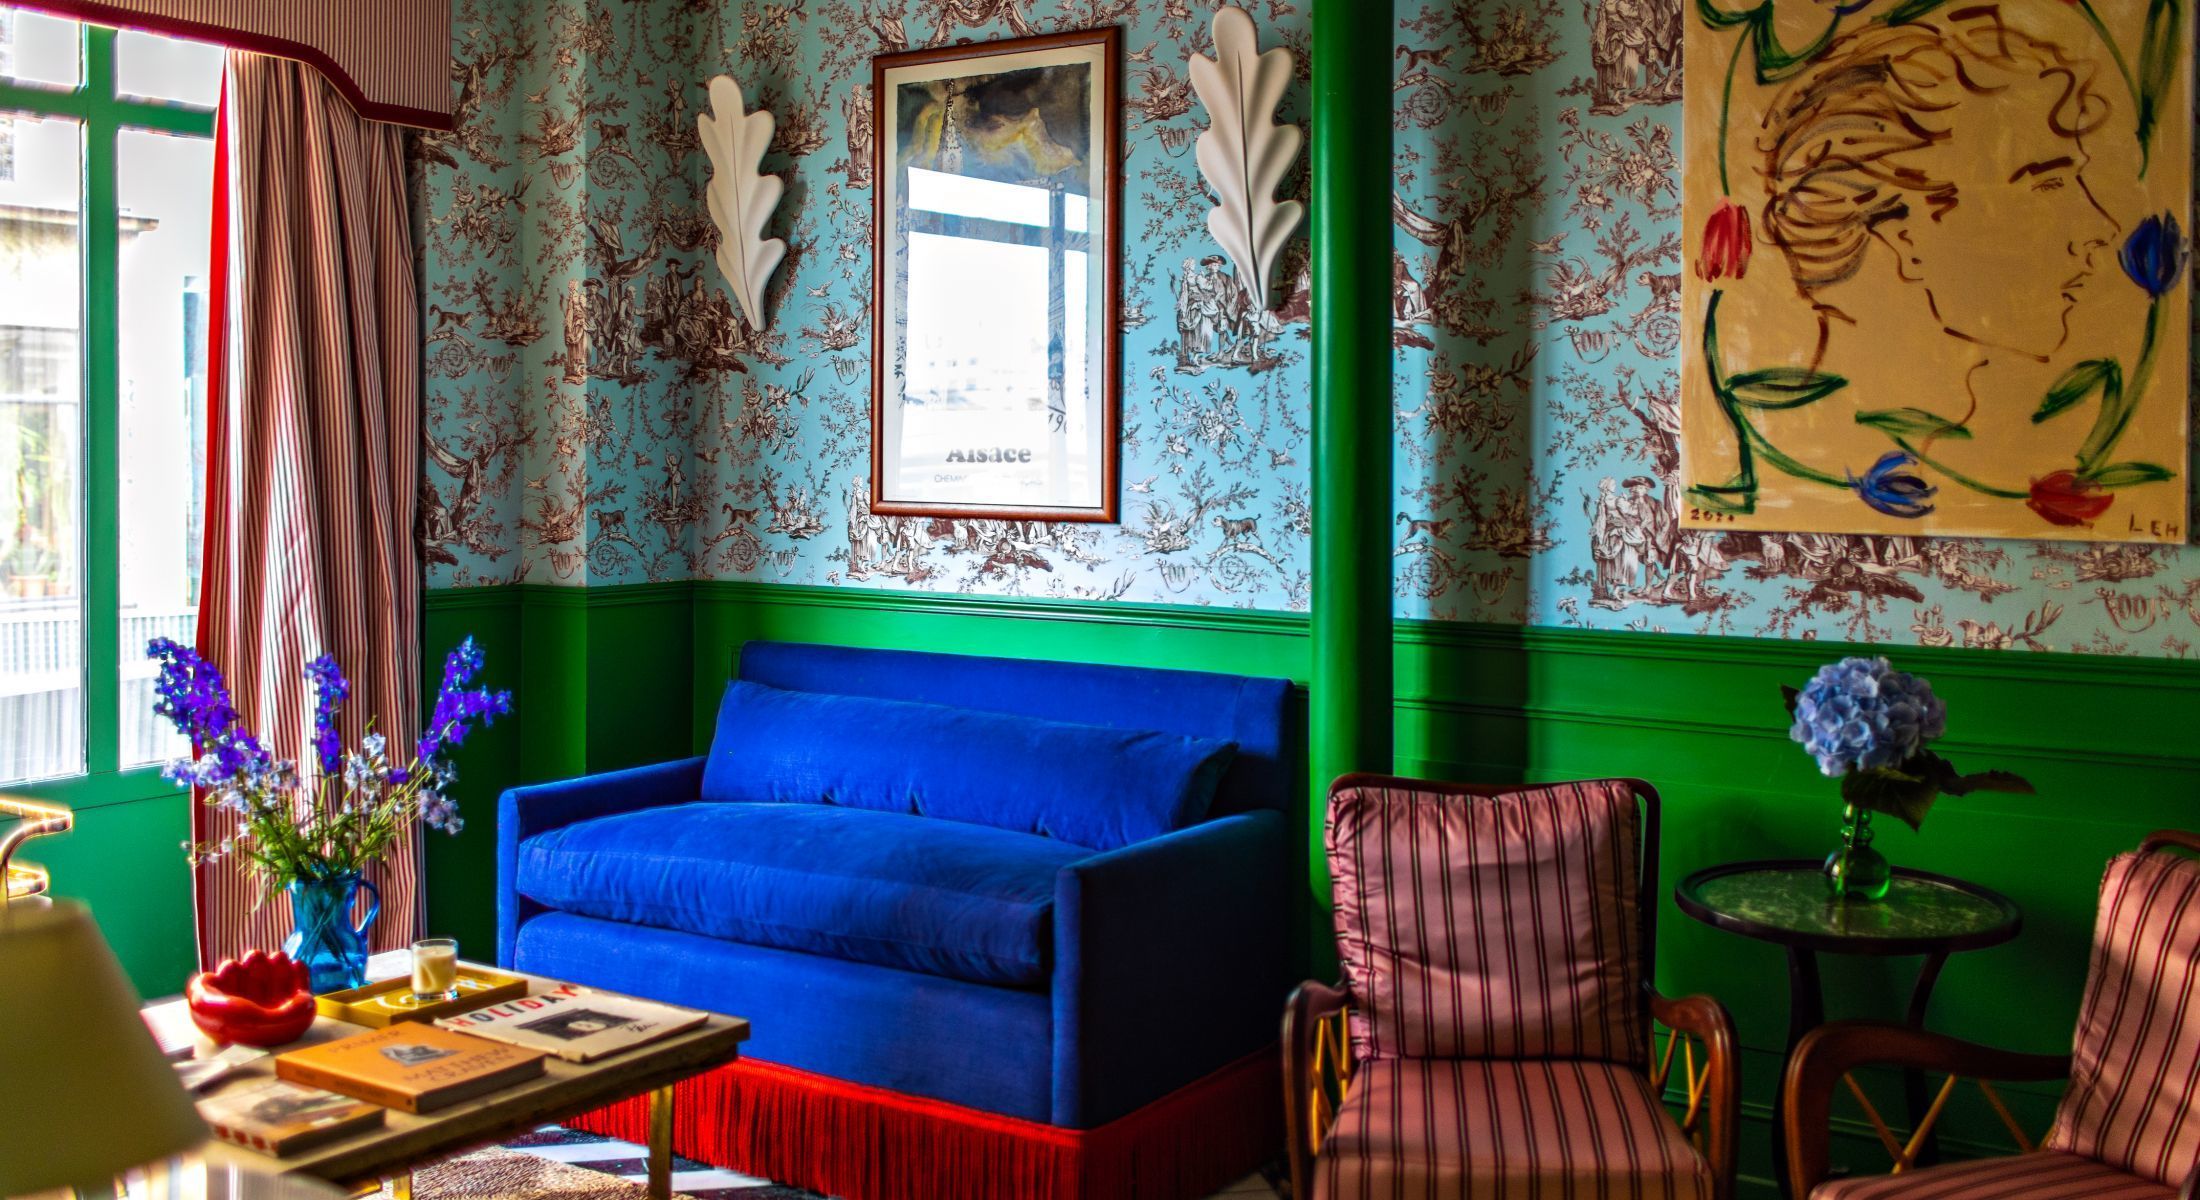 The eclectic mixed print lobby design of Hotel Les Deux Gares in Paris by Luke Edward Hall with striped pink + red satin armchairs, an electric blue velvet sofa with bright red fringe, leafy wall sconces inspired by Matisse, a blue + brown toile de jouy fabric wall split by glossy green paneled wainscoting and a Greco-Roman inspired bust portrait from the artist himself